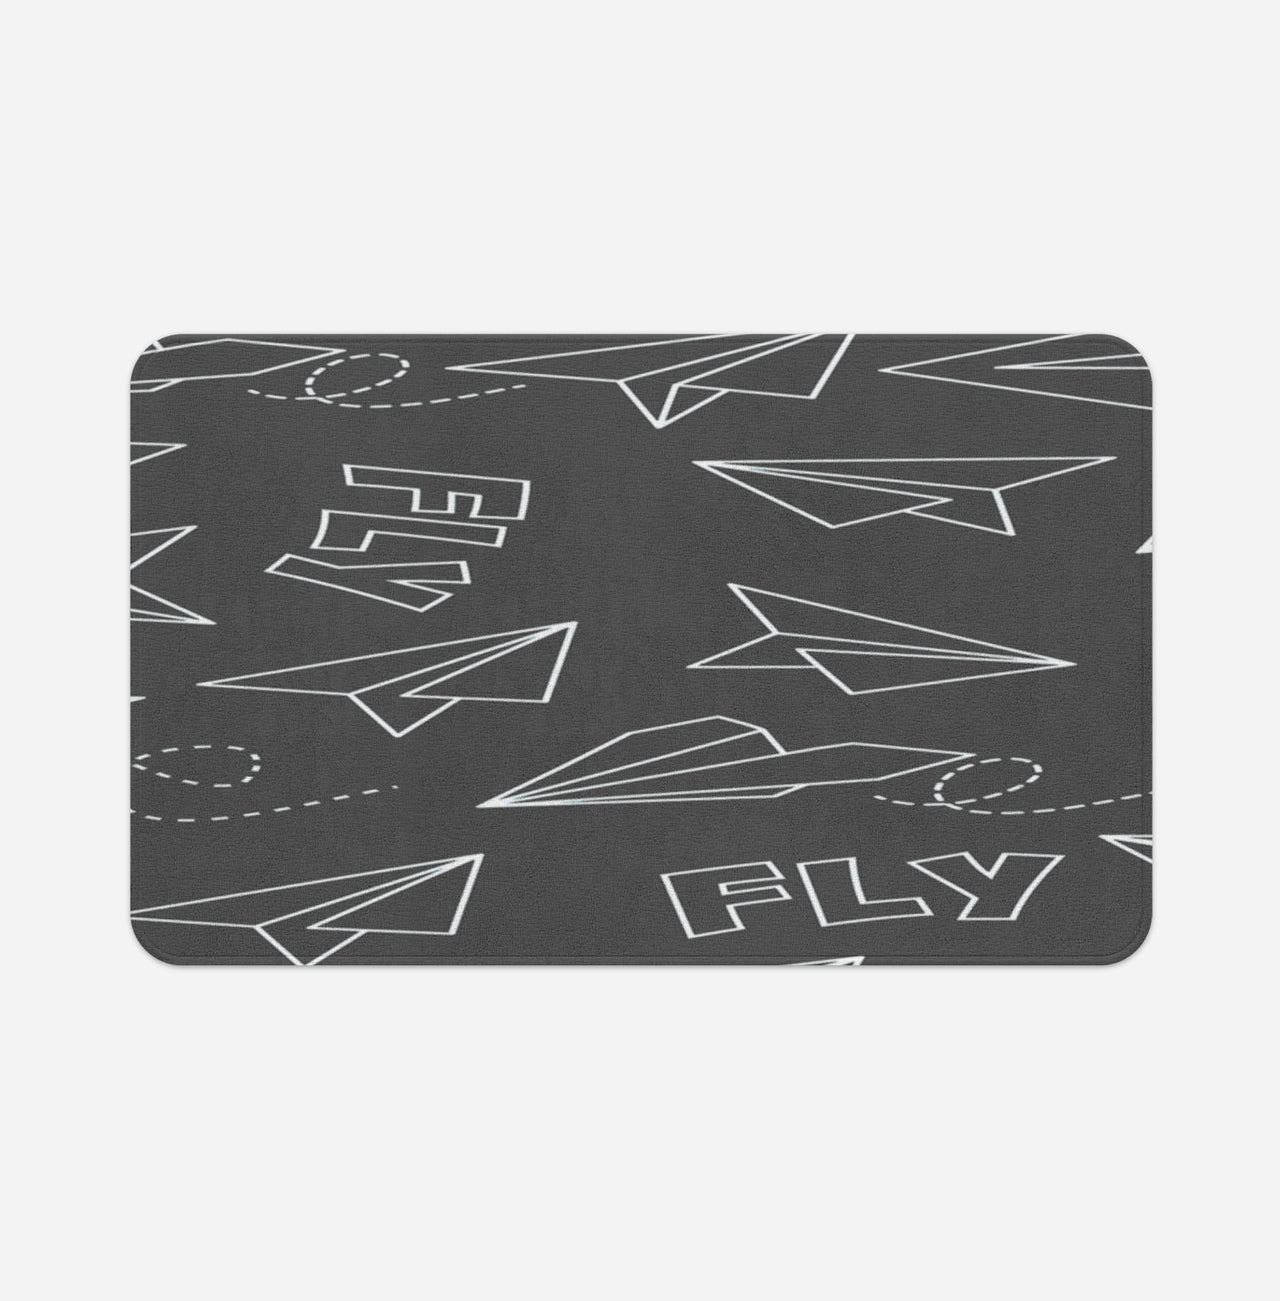 Paper Airplane & Fly-Gray Designed Bath Mats